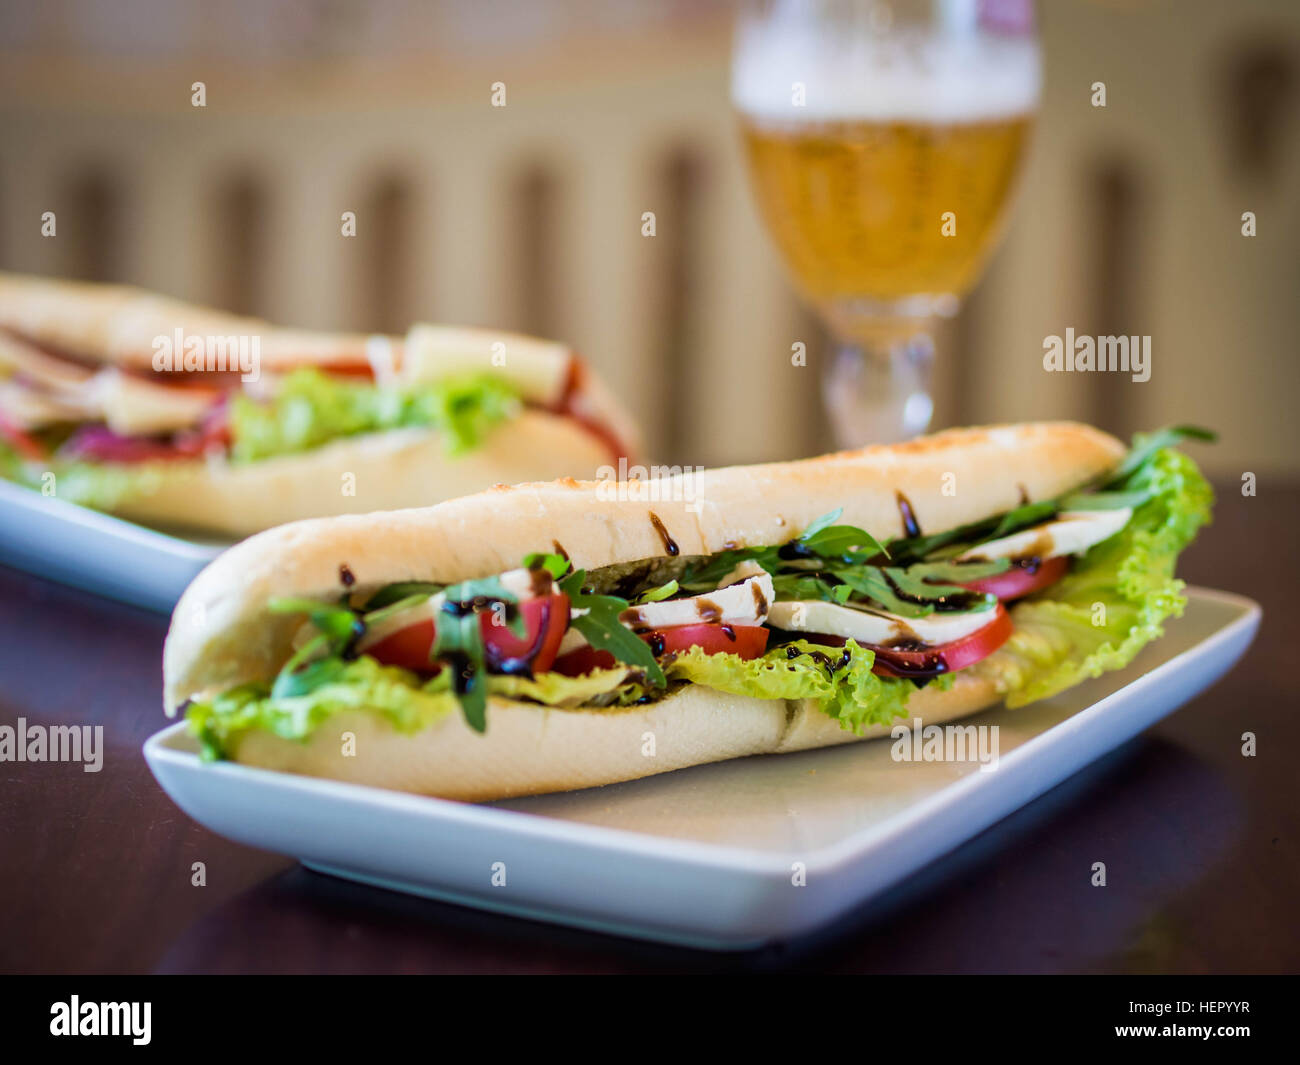 Mozzarella, tomato and balsamic vinegar baguette with glass of beer Stock Photo